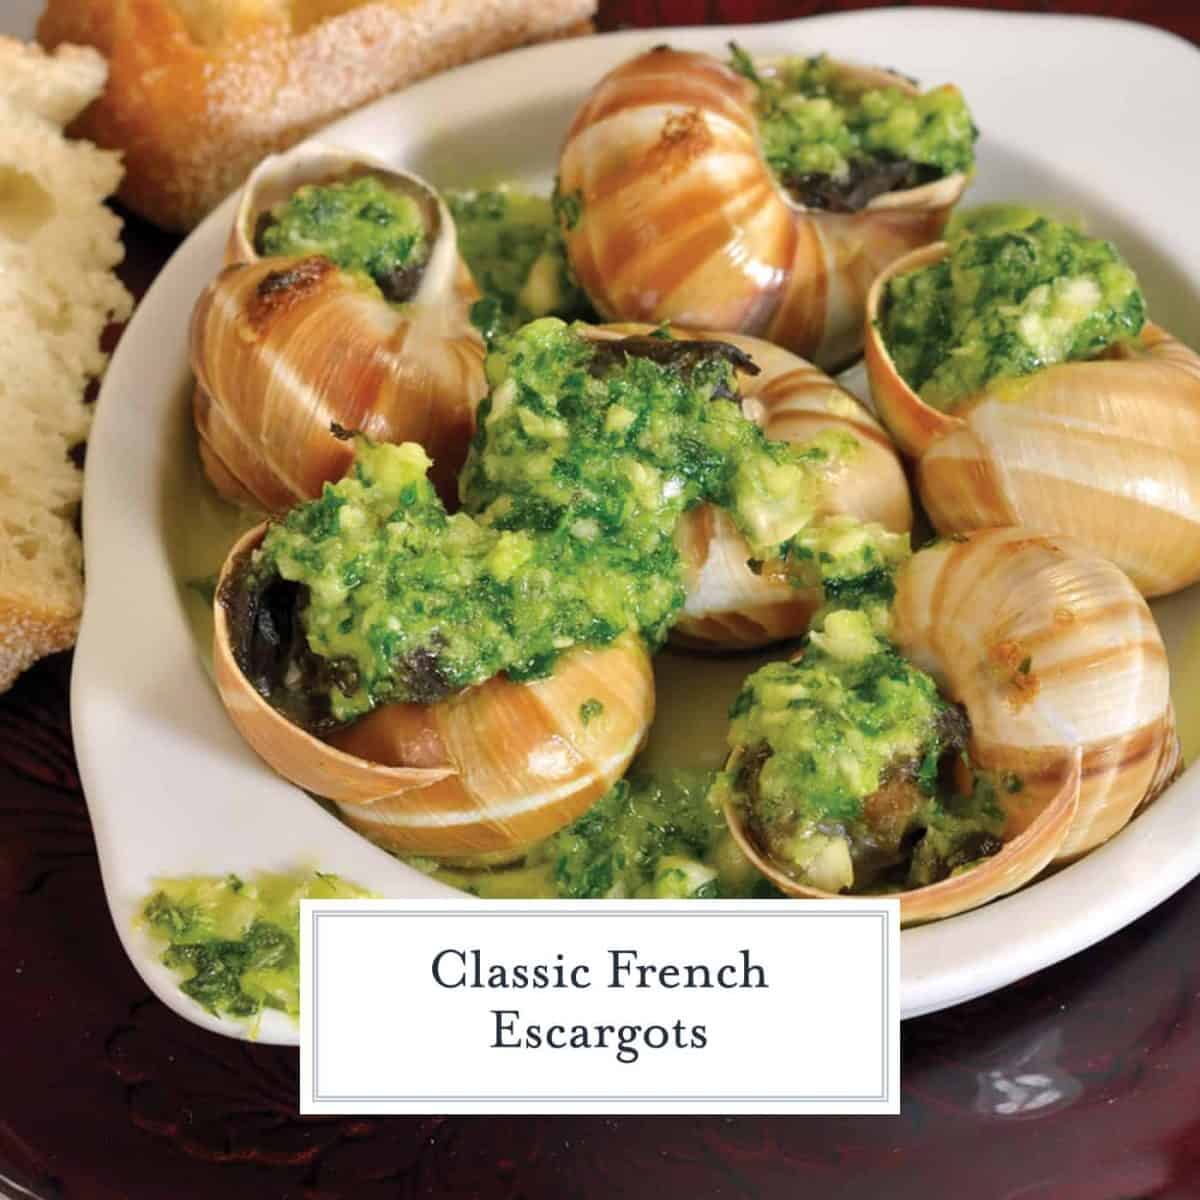 A recipe for Classic French Escargot with a parsley garlic butter in a shell or covered in puff pastry, make them however you'd like! #howtomakeescargot #frenchescargot www.savoryexperiments.com